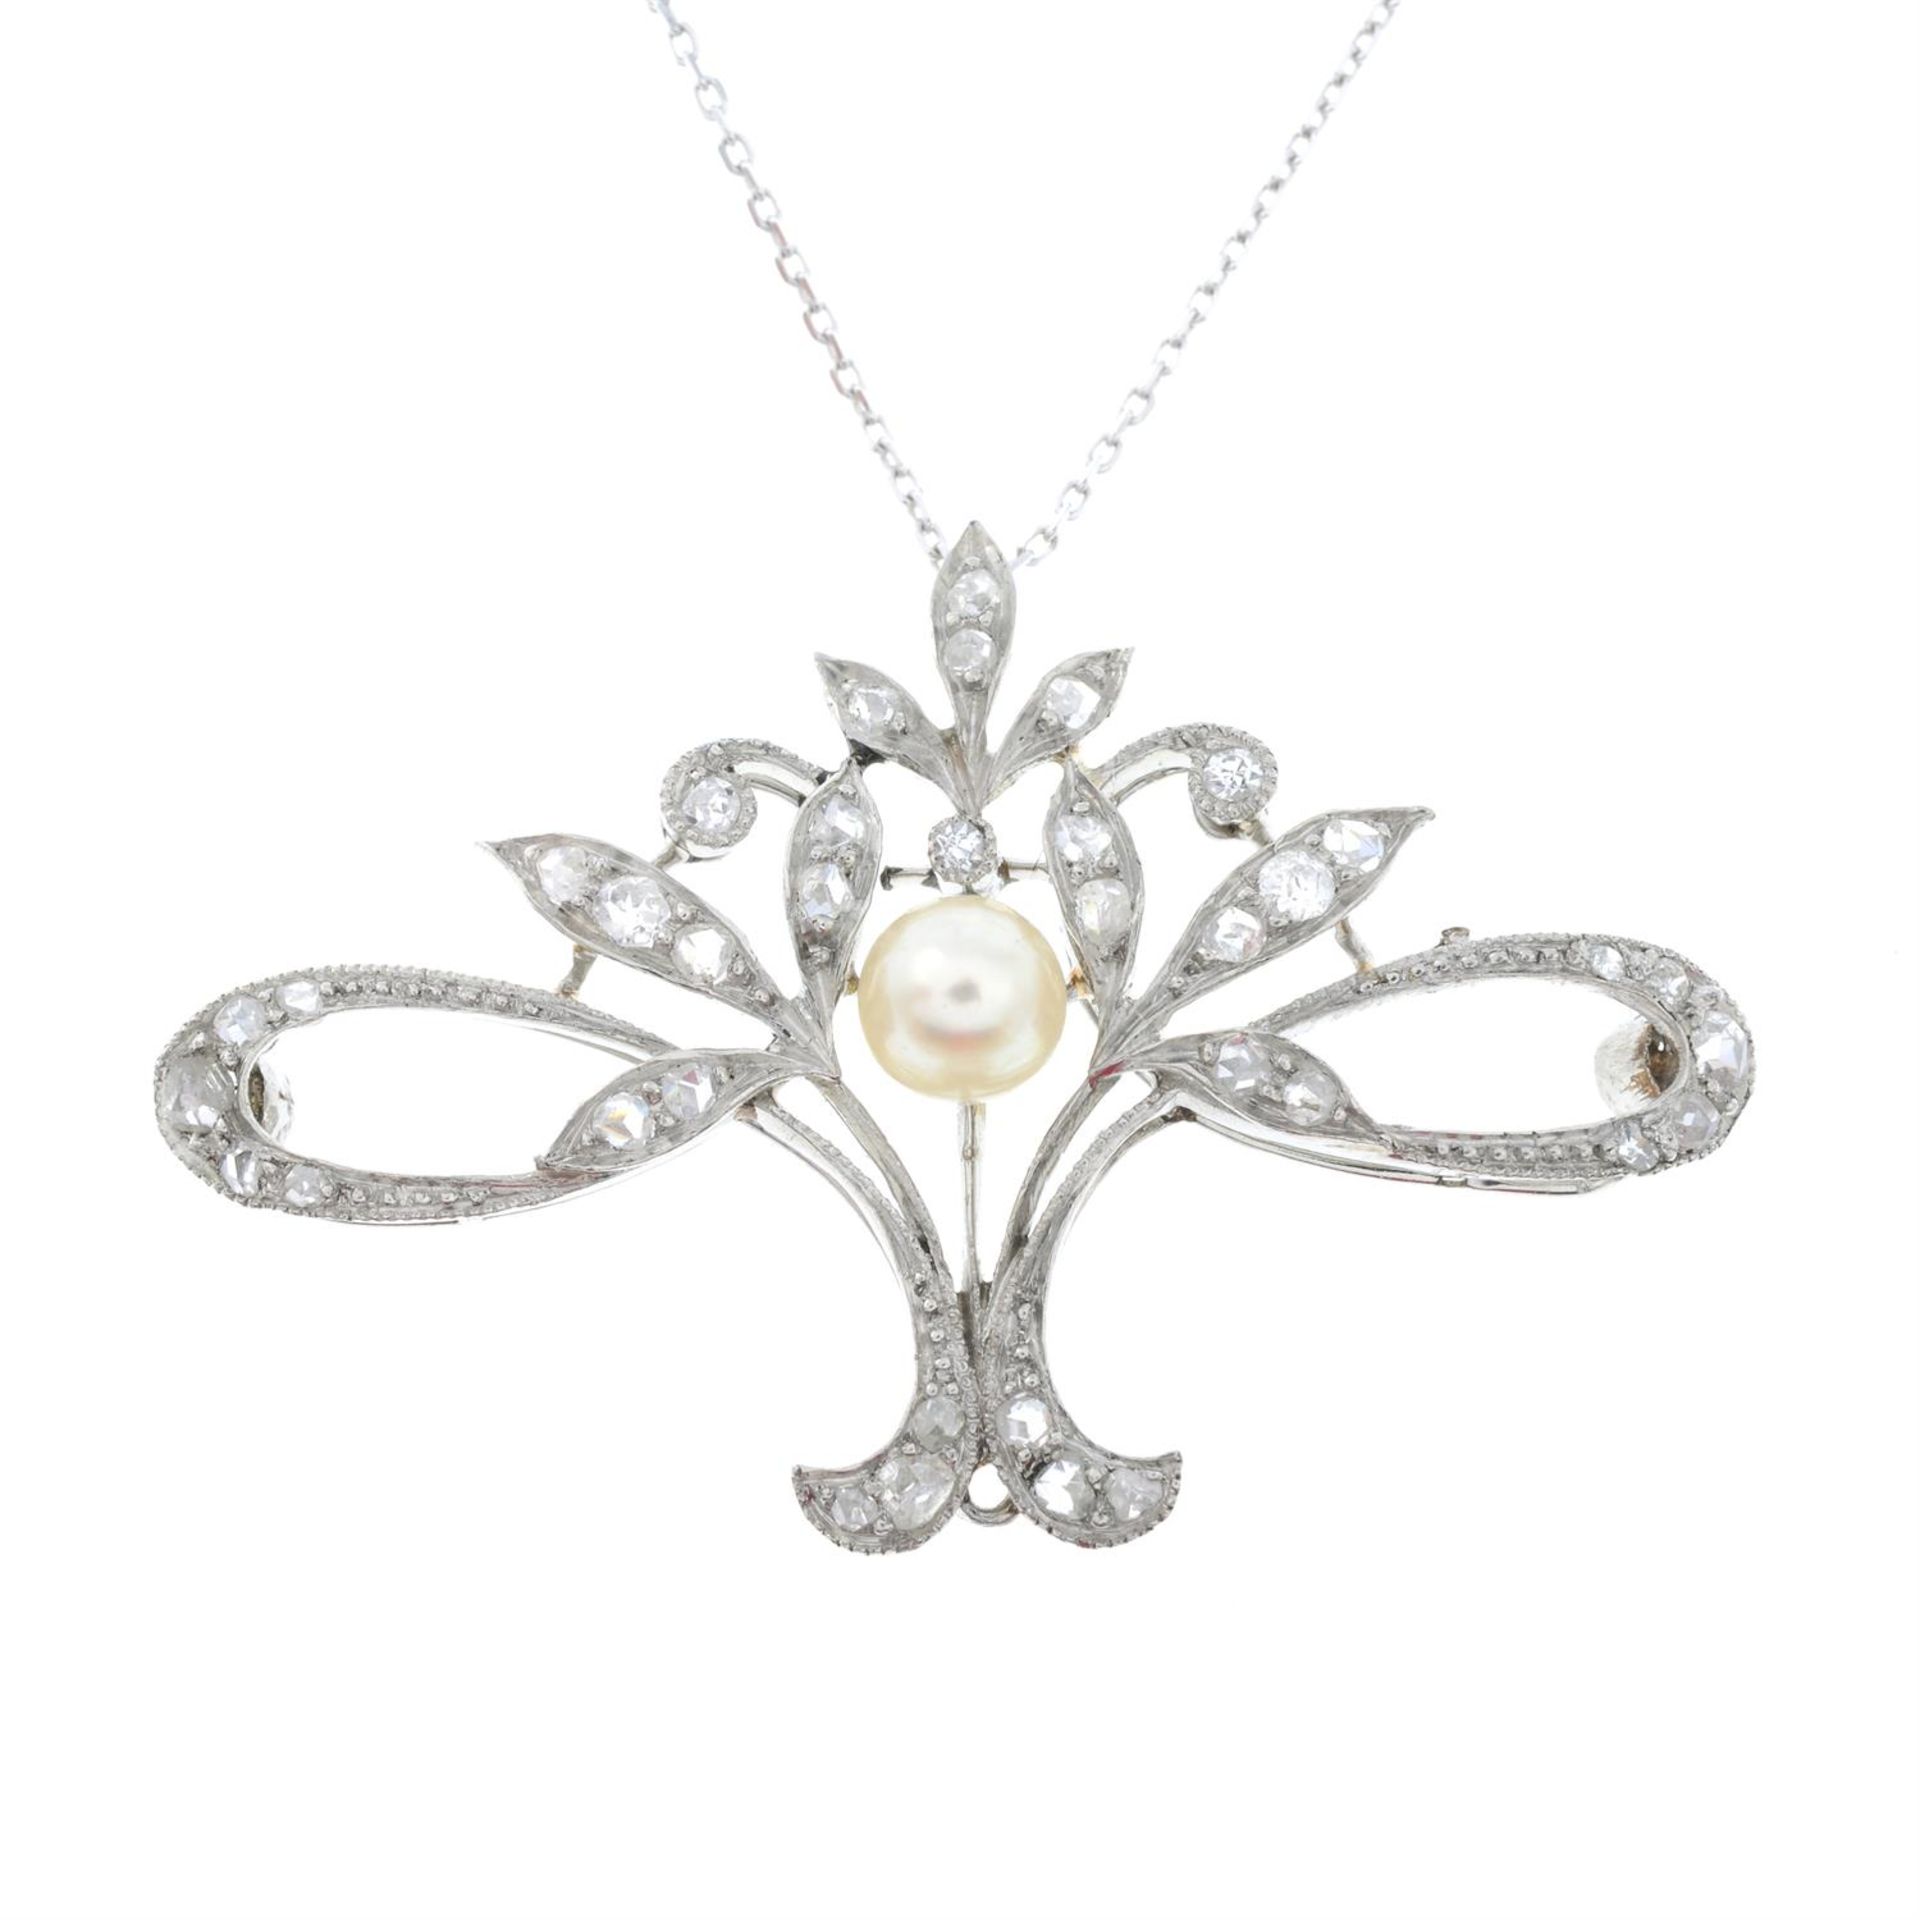 A Belle Époque platinum, pearl and diamond pendant, with later chain. - Image 2 of 5